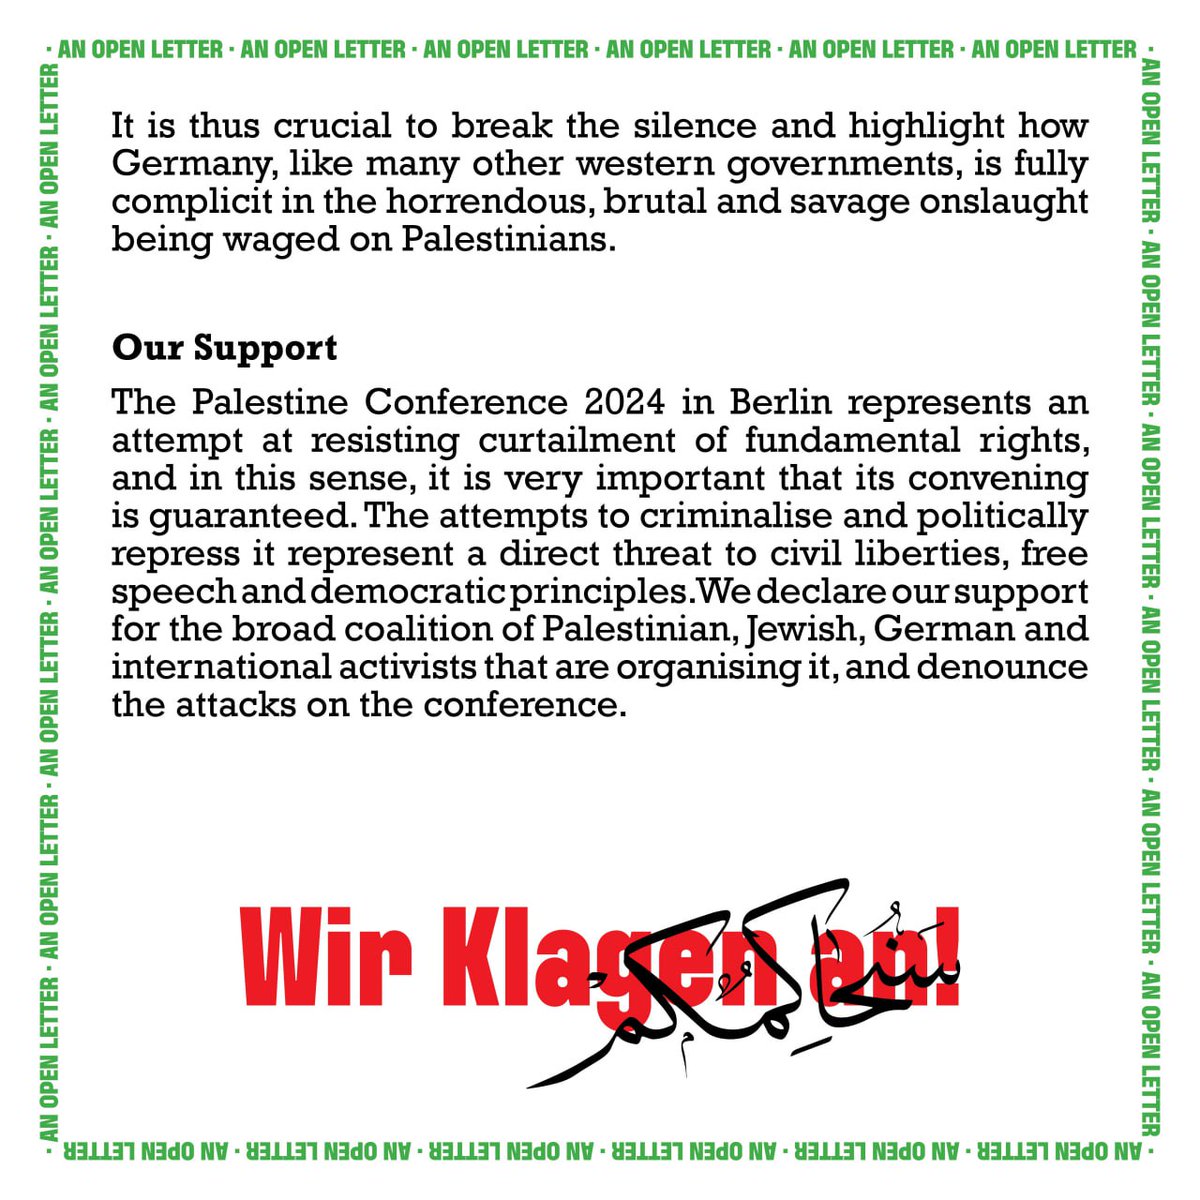 I would like to ask you for your help. Could you...

- retweet and comment on this post? twitter.com/wirklagenan/st…

- post your own tweet? Something like this:

I give my support to the Palestine Conference to break the silence in Germany!

#WeAccuseGermany #PalaestinaKongress